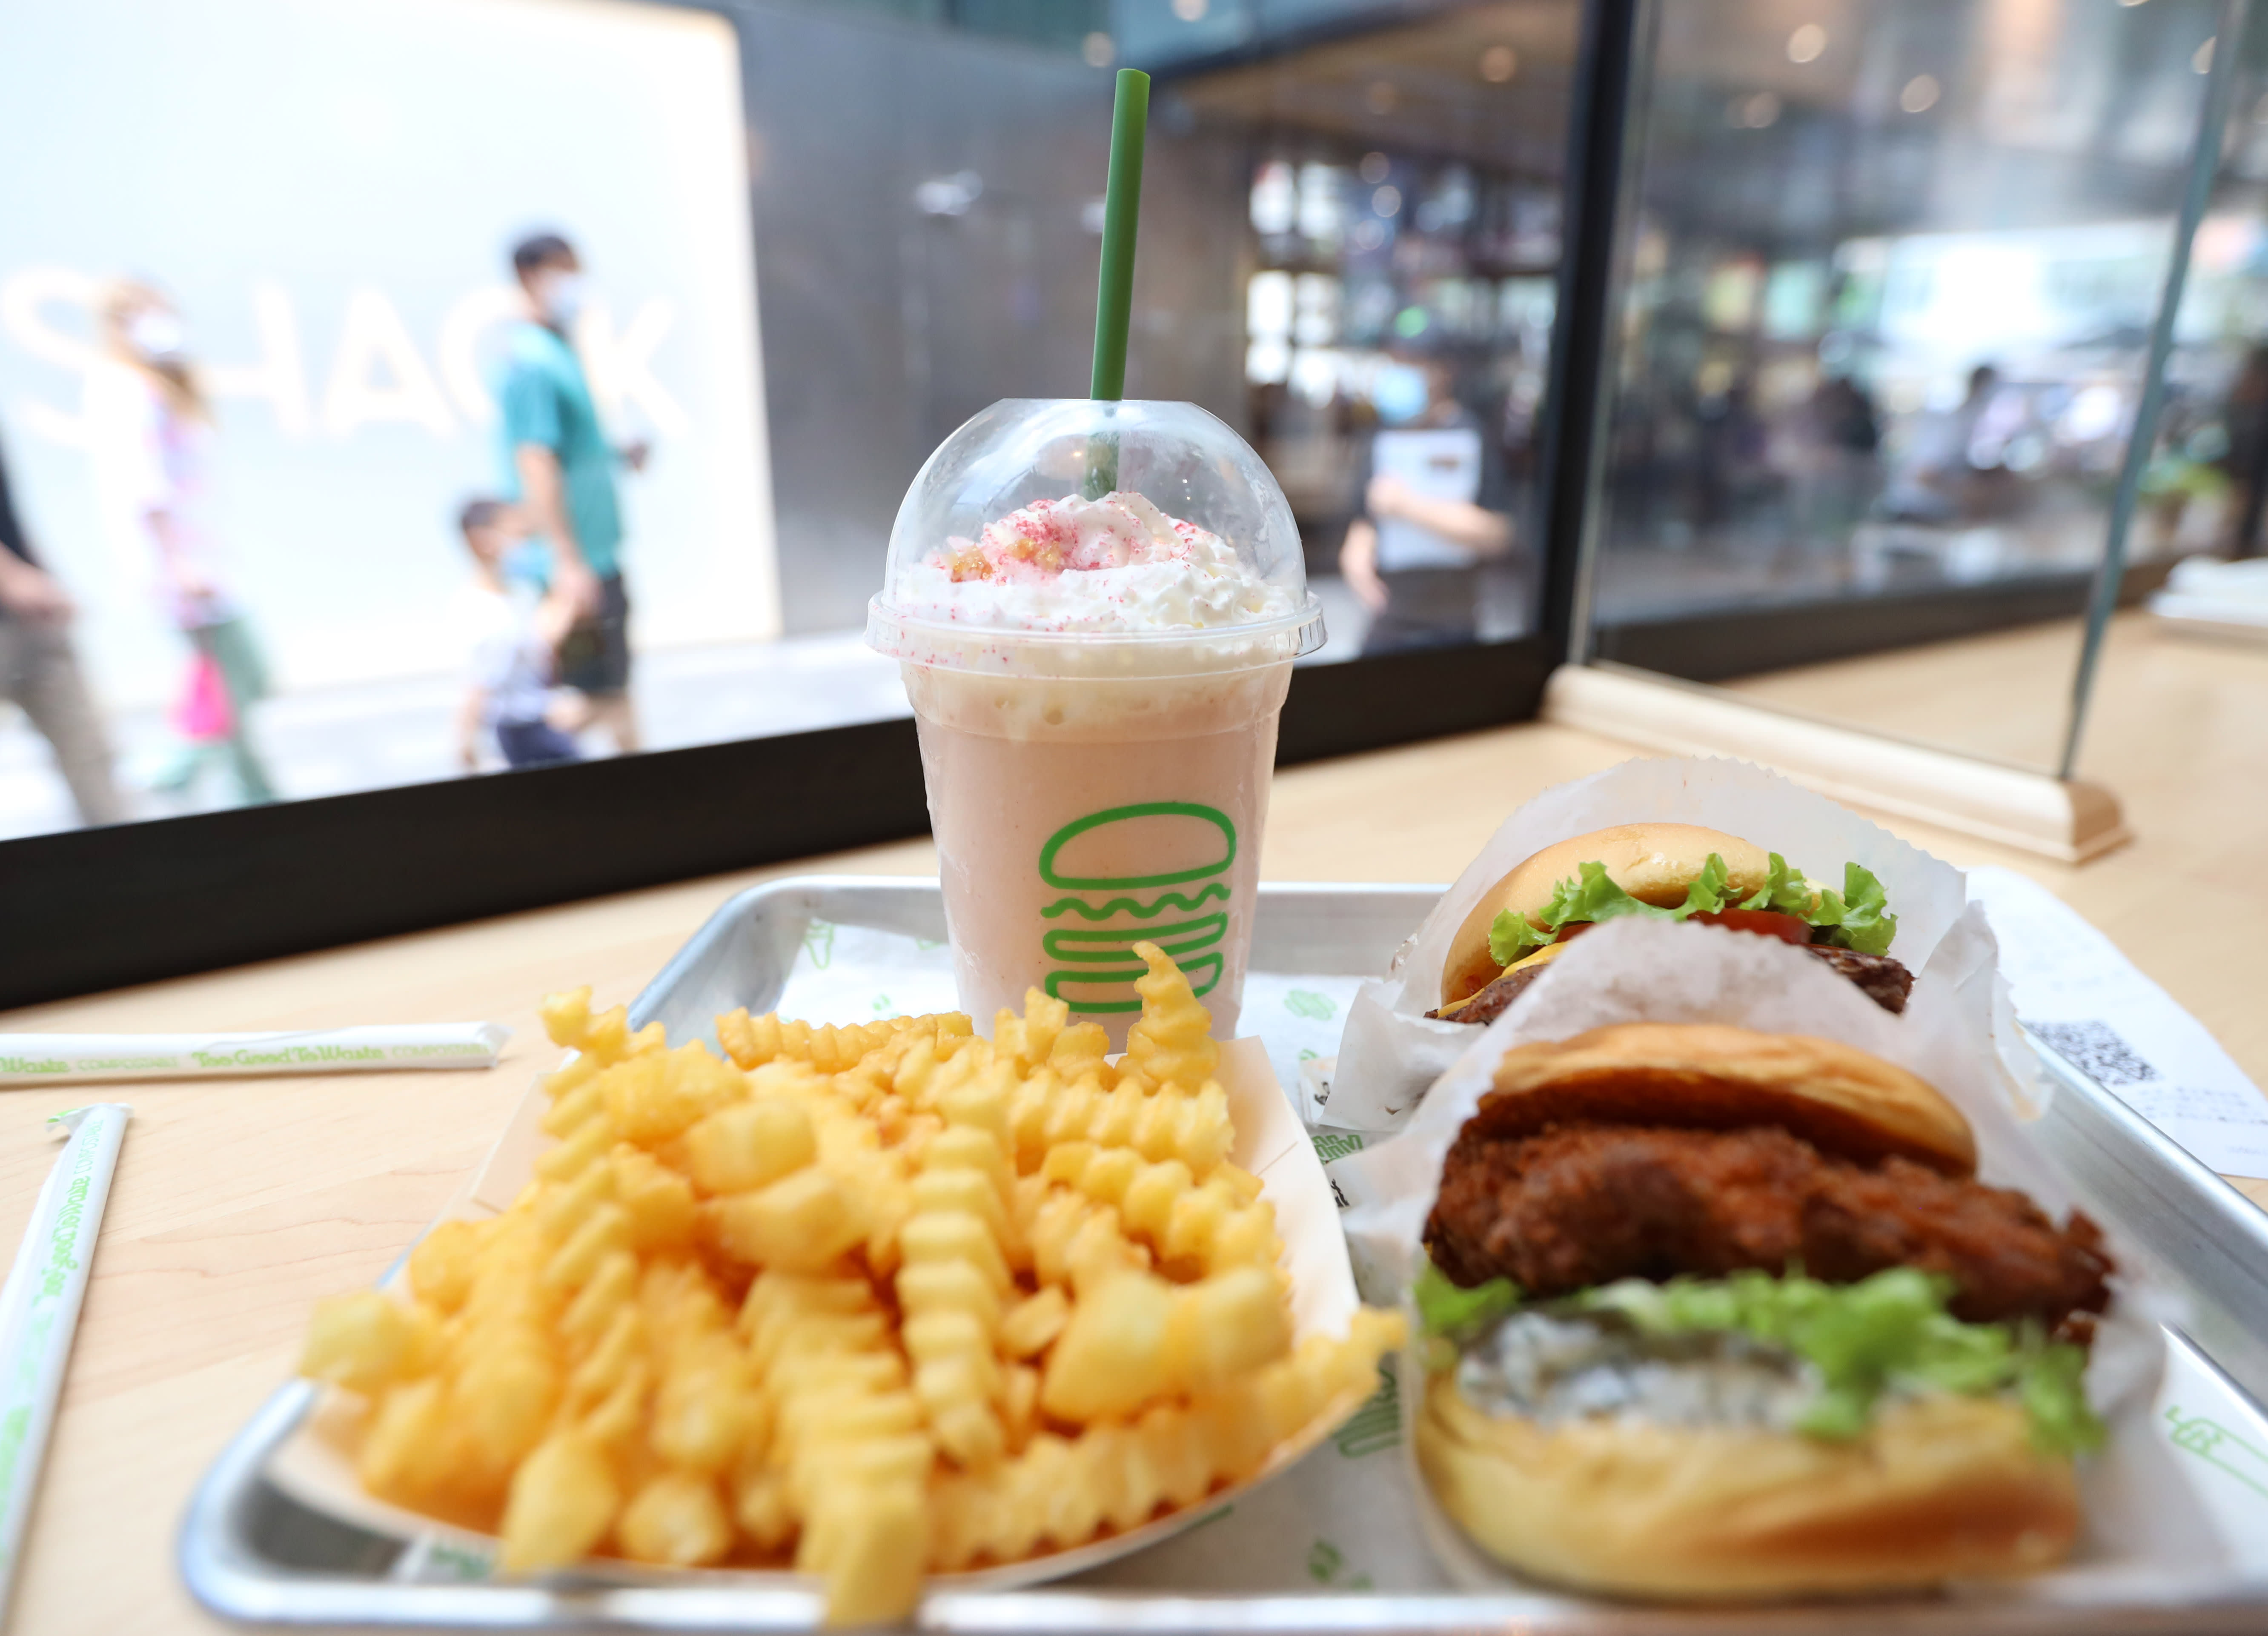 Shake Shack has “big plans for Asia” as it spreads to China, Macao